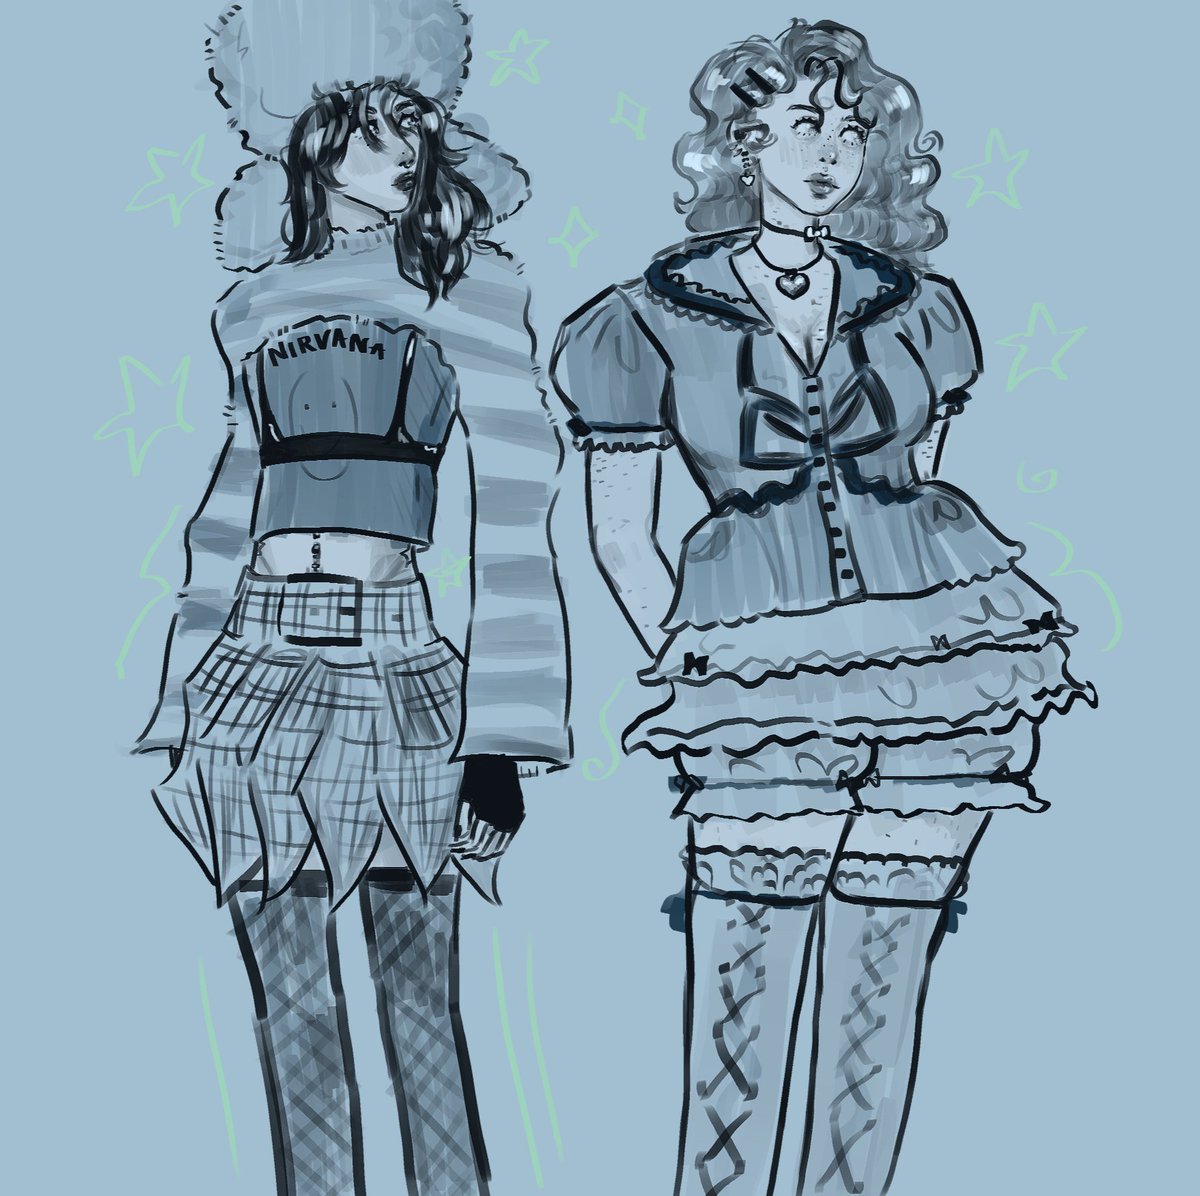 lily and sirius in some fun outfits bcs i have artblock and silly clothes help #marauders #lilyevans #siriusblack